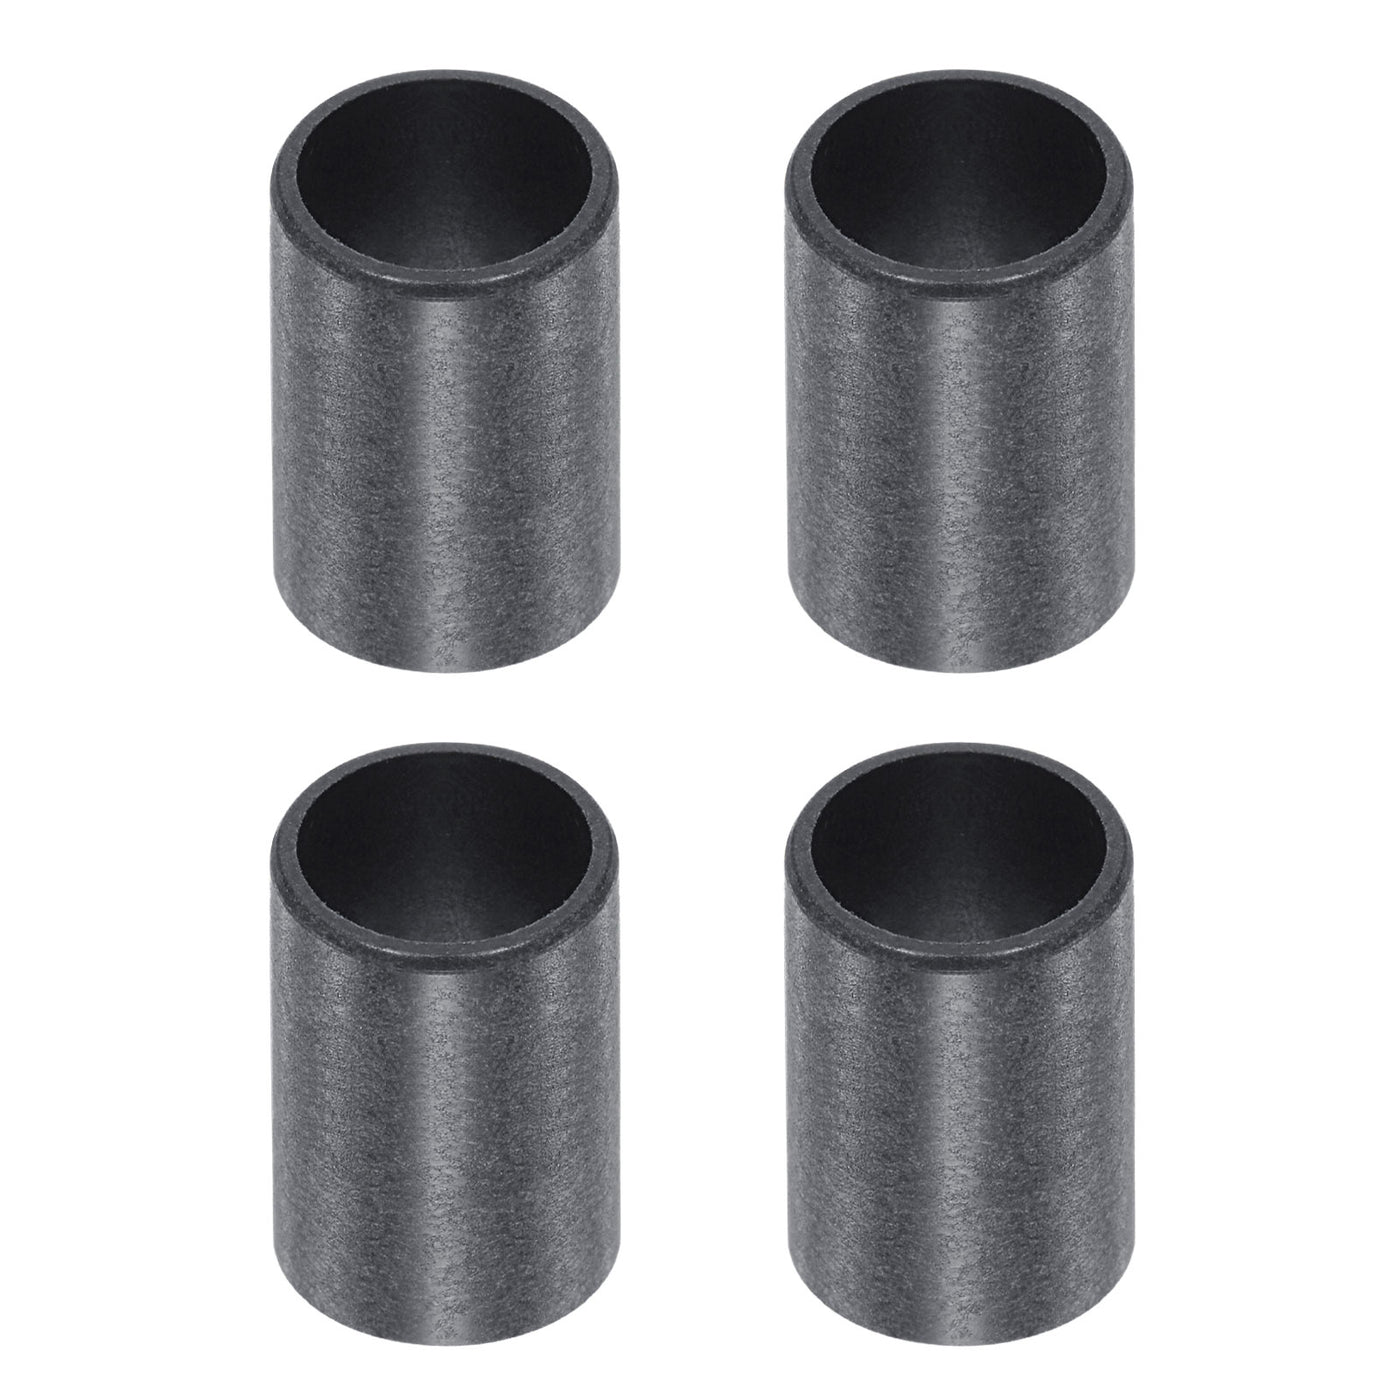 uxcell Uxcell Sleeve Bearings 10mmx12mmx20mm POM Wrapped Oilless Bushings Black 4pcs